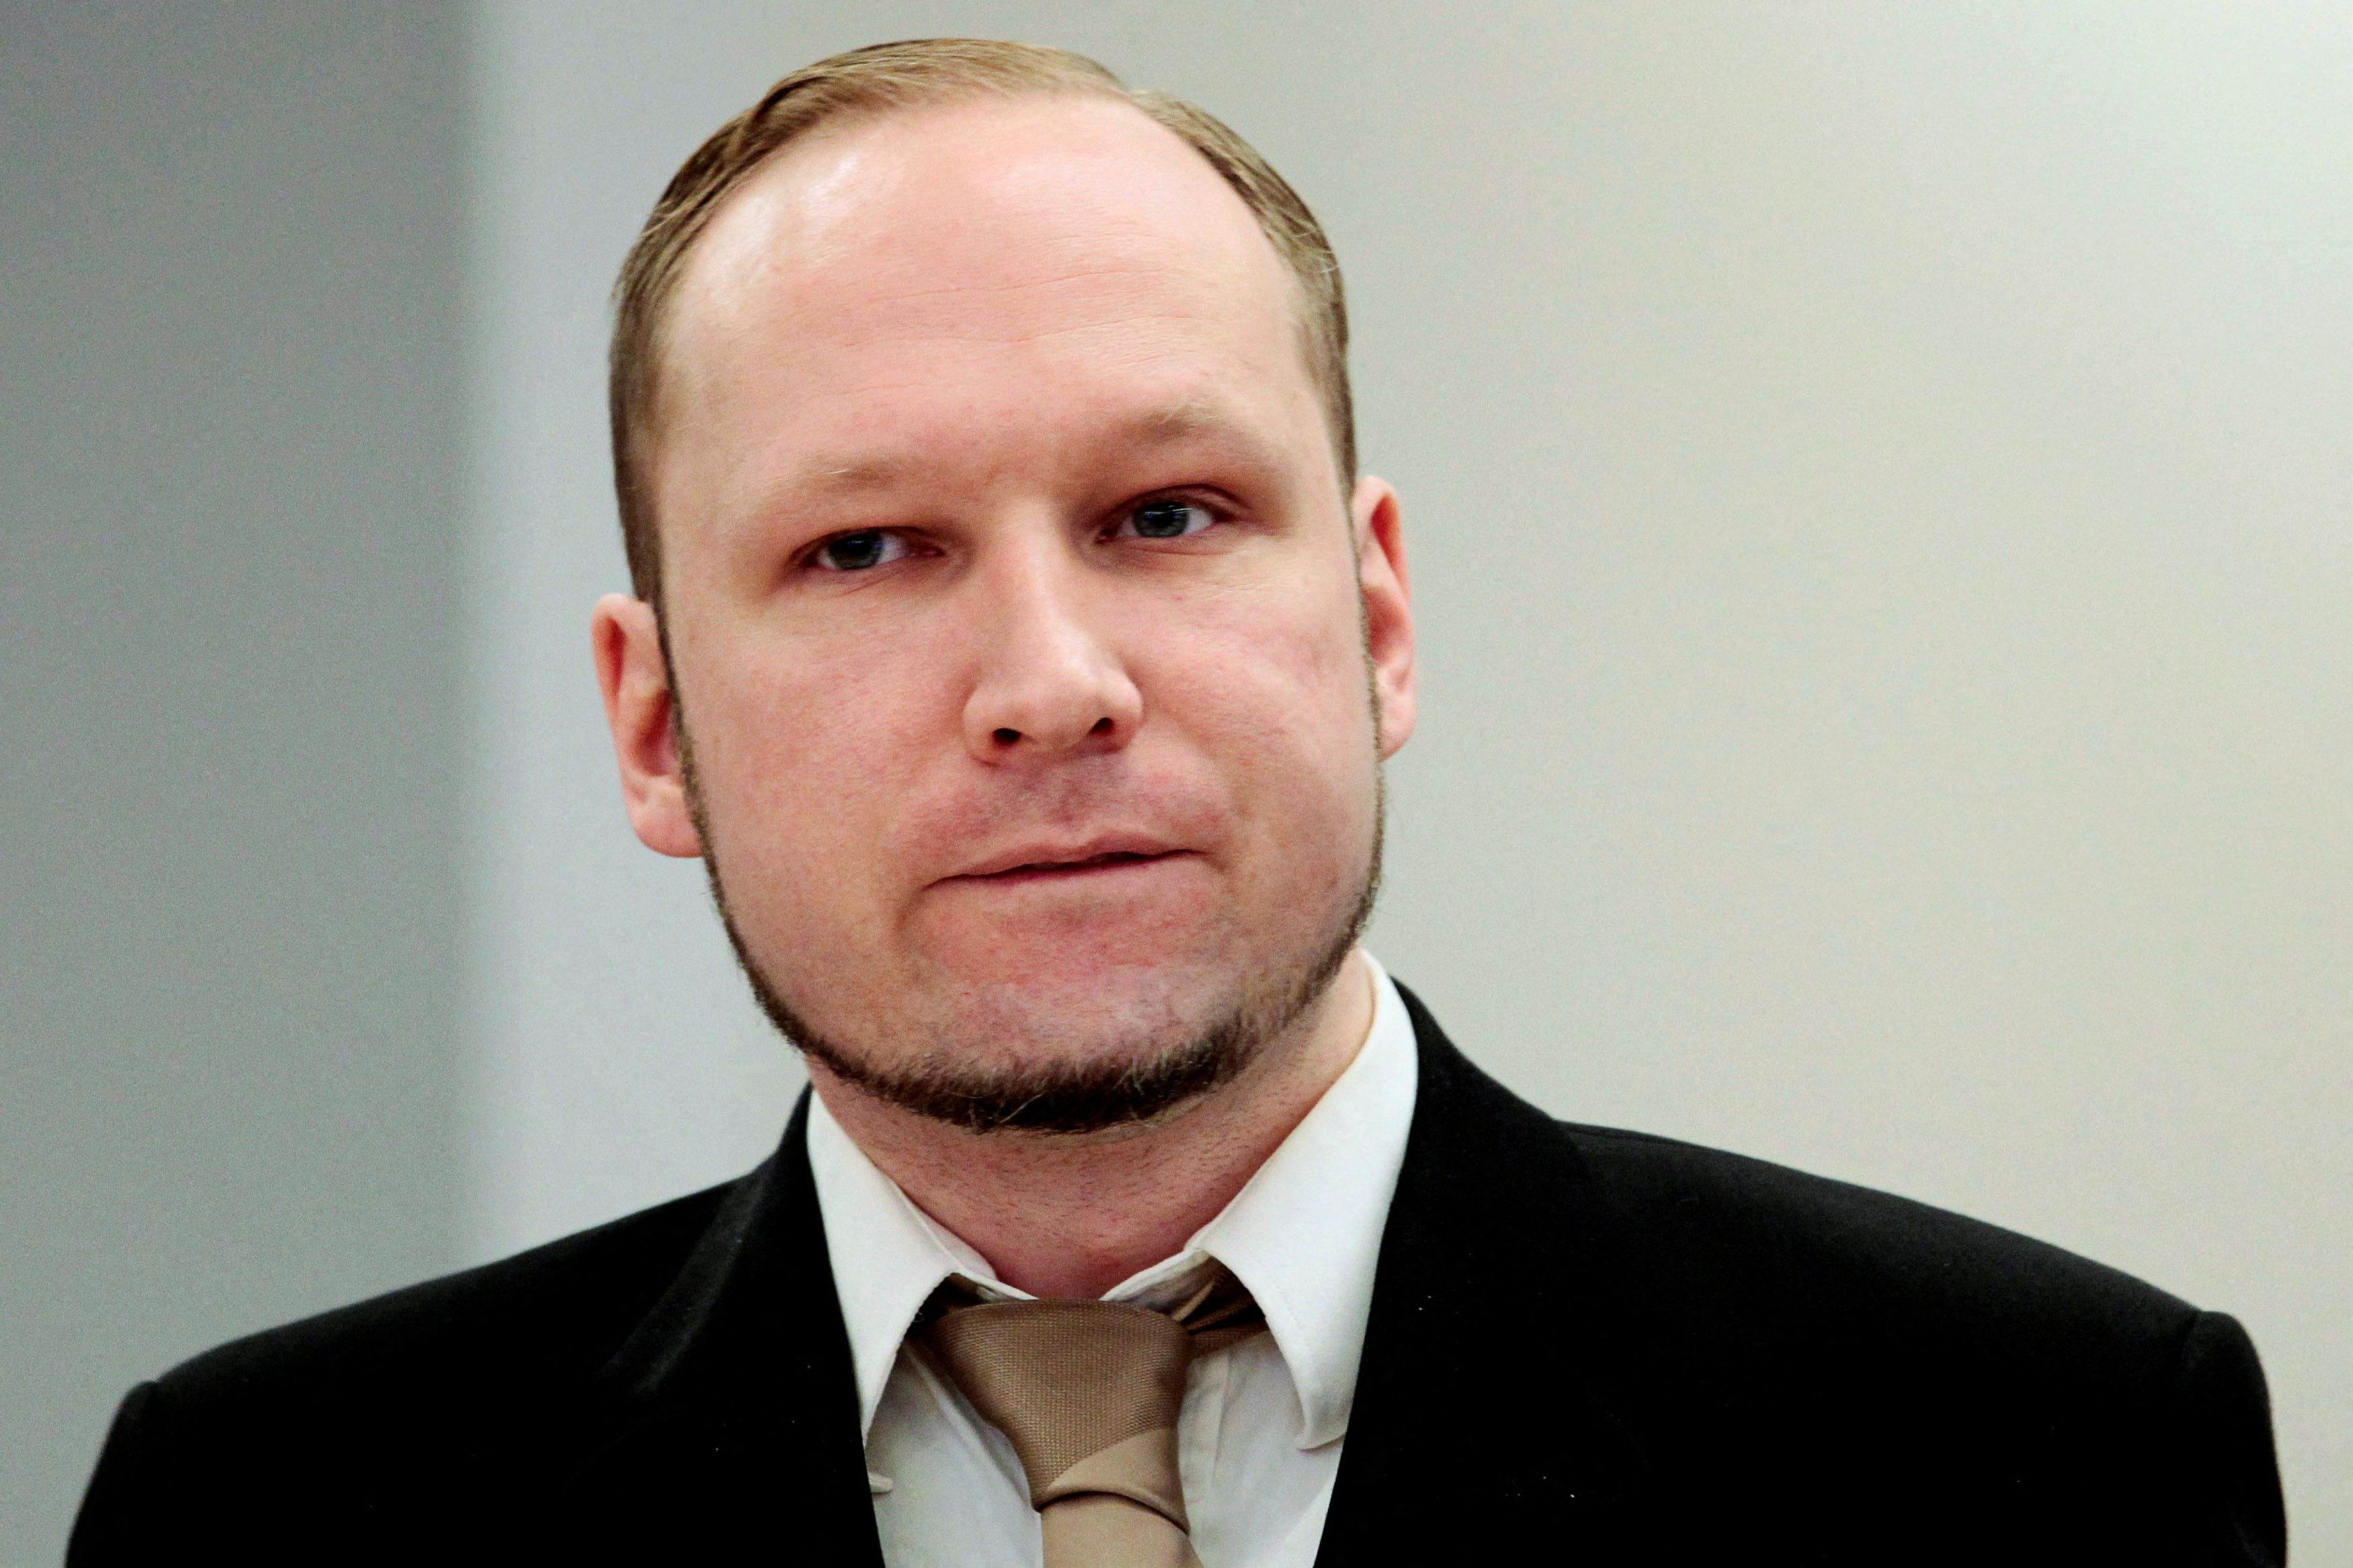 Norwegian mass killer Breivik attends the second day of his terrorism and murder trial in Oslo. Breivik on June 9, 2017 changed his name to Fjotolf Hansen.